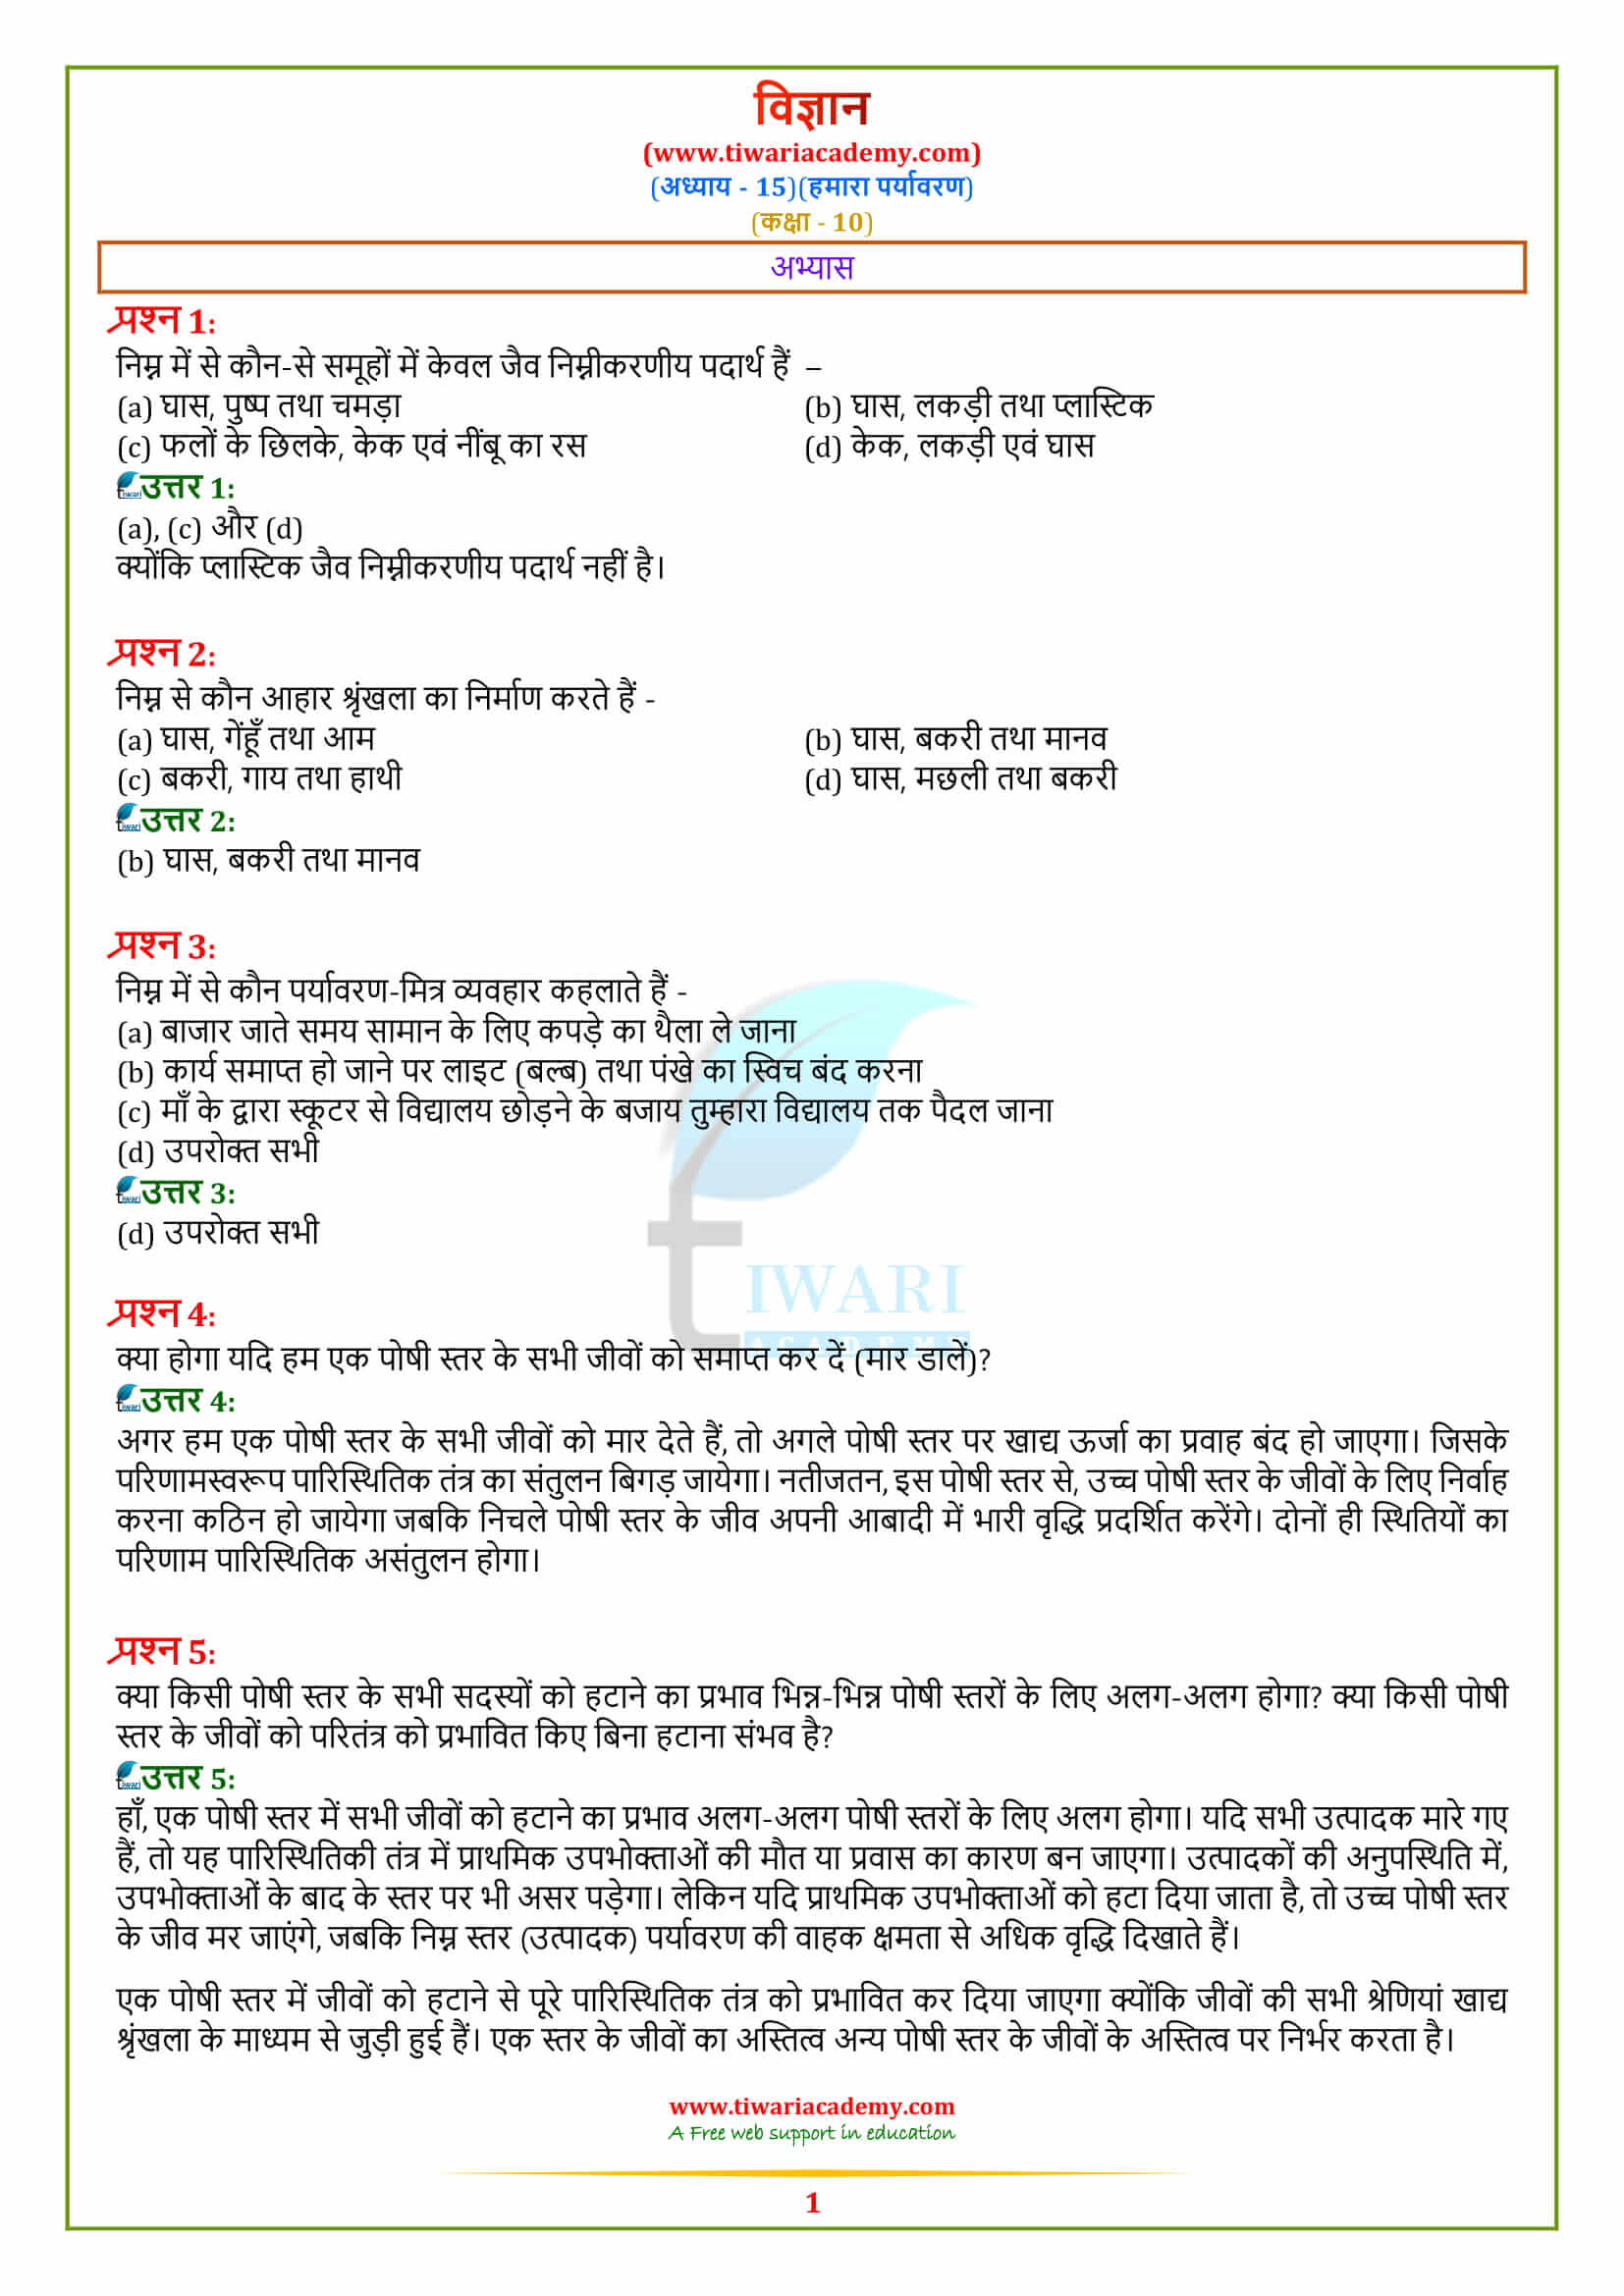 NCERT Solutions for Class 10 Science Chapter 15 all answers in hindi